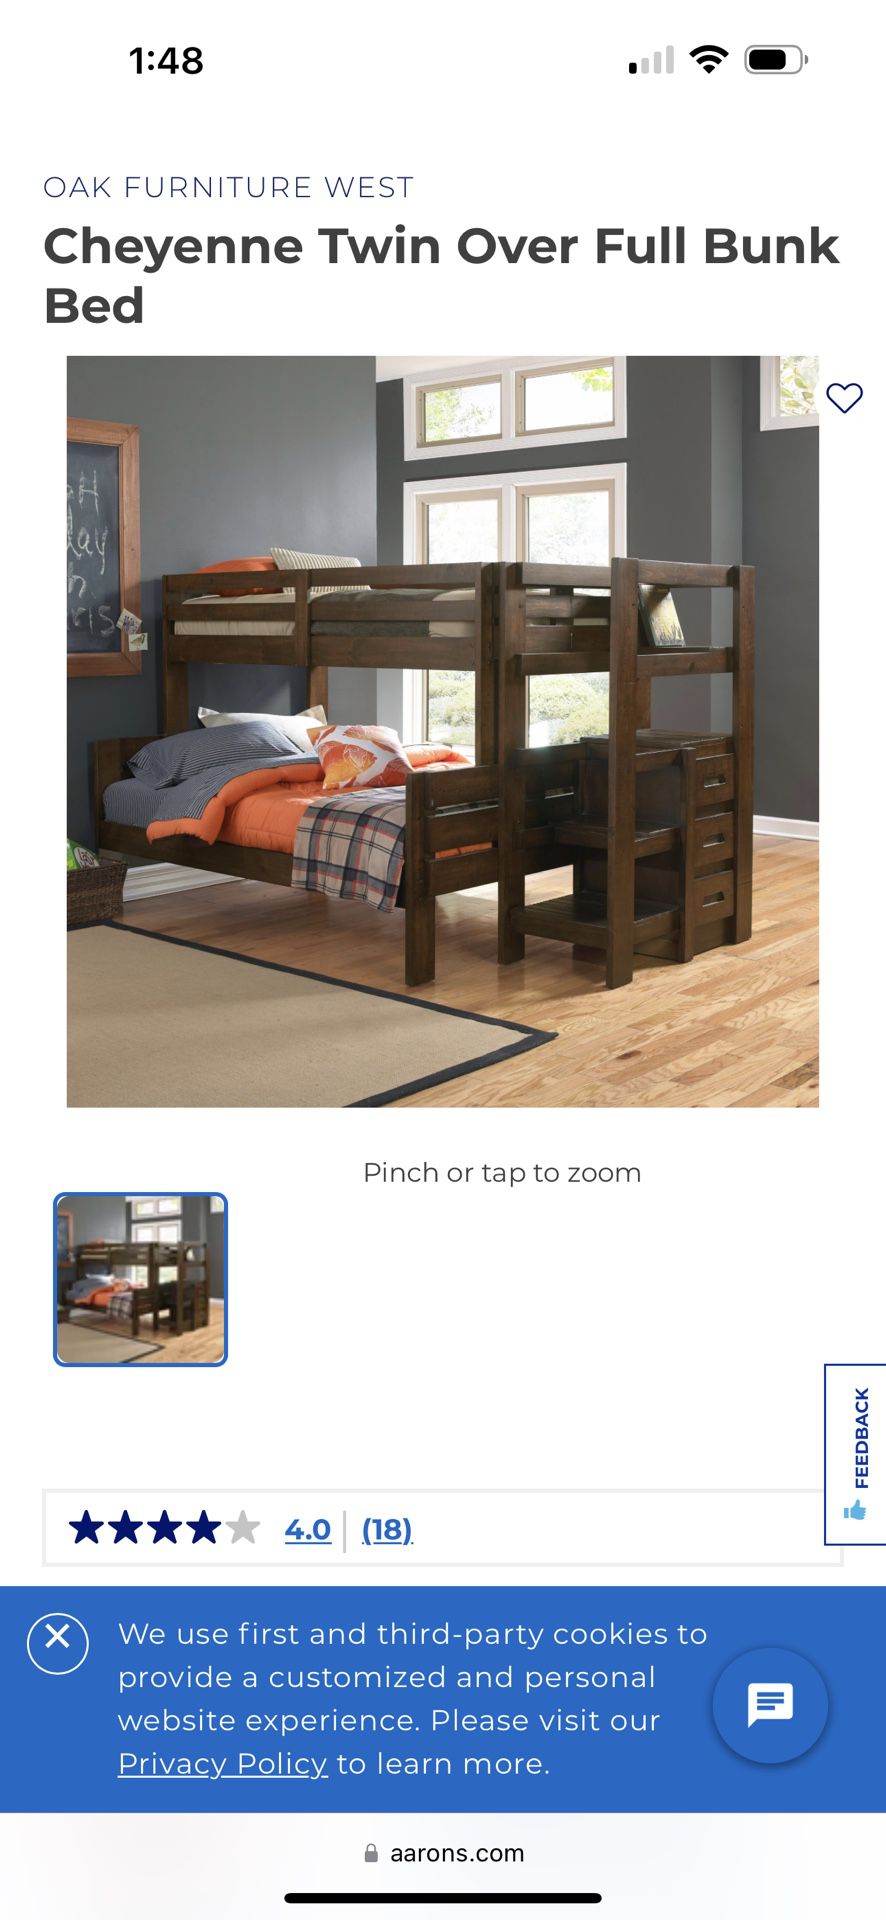 Cheyenne Twin Over Full Bunk Bed